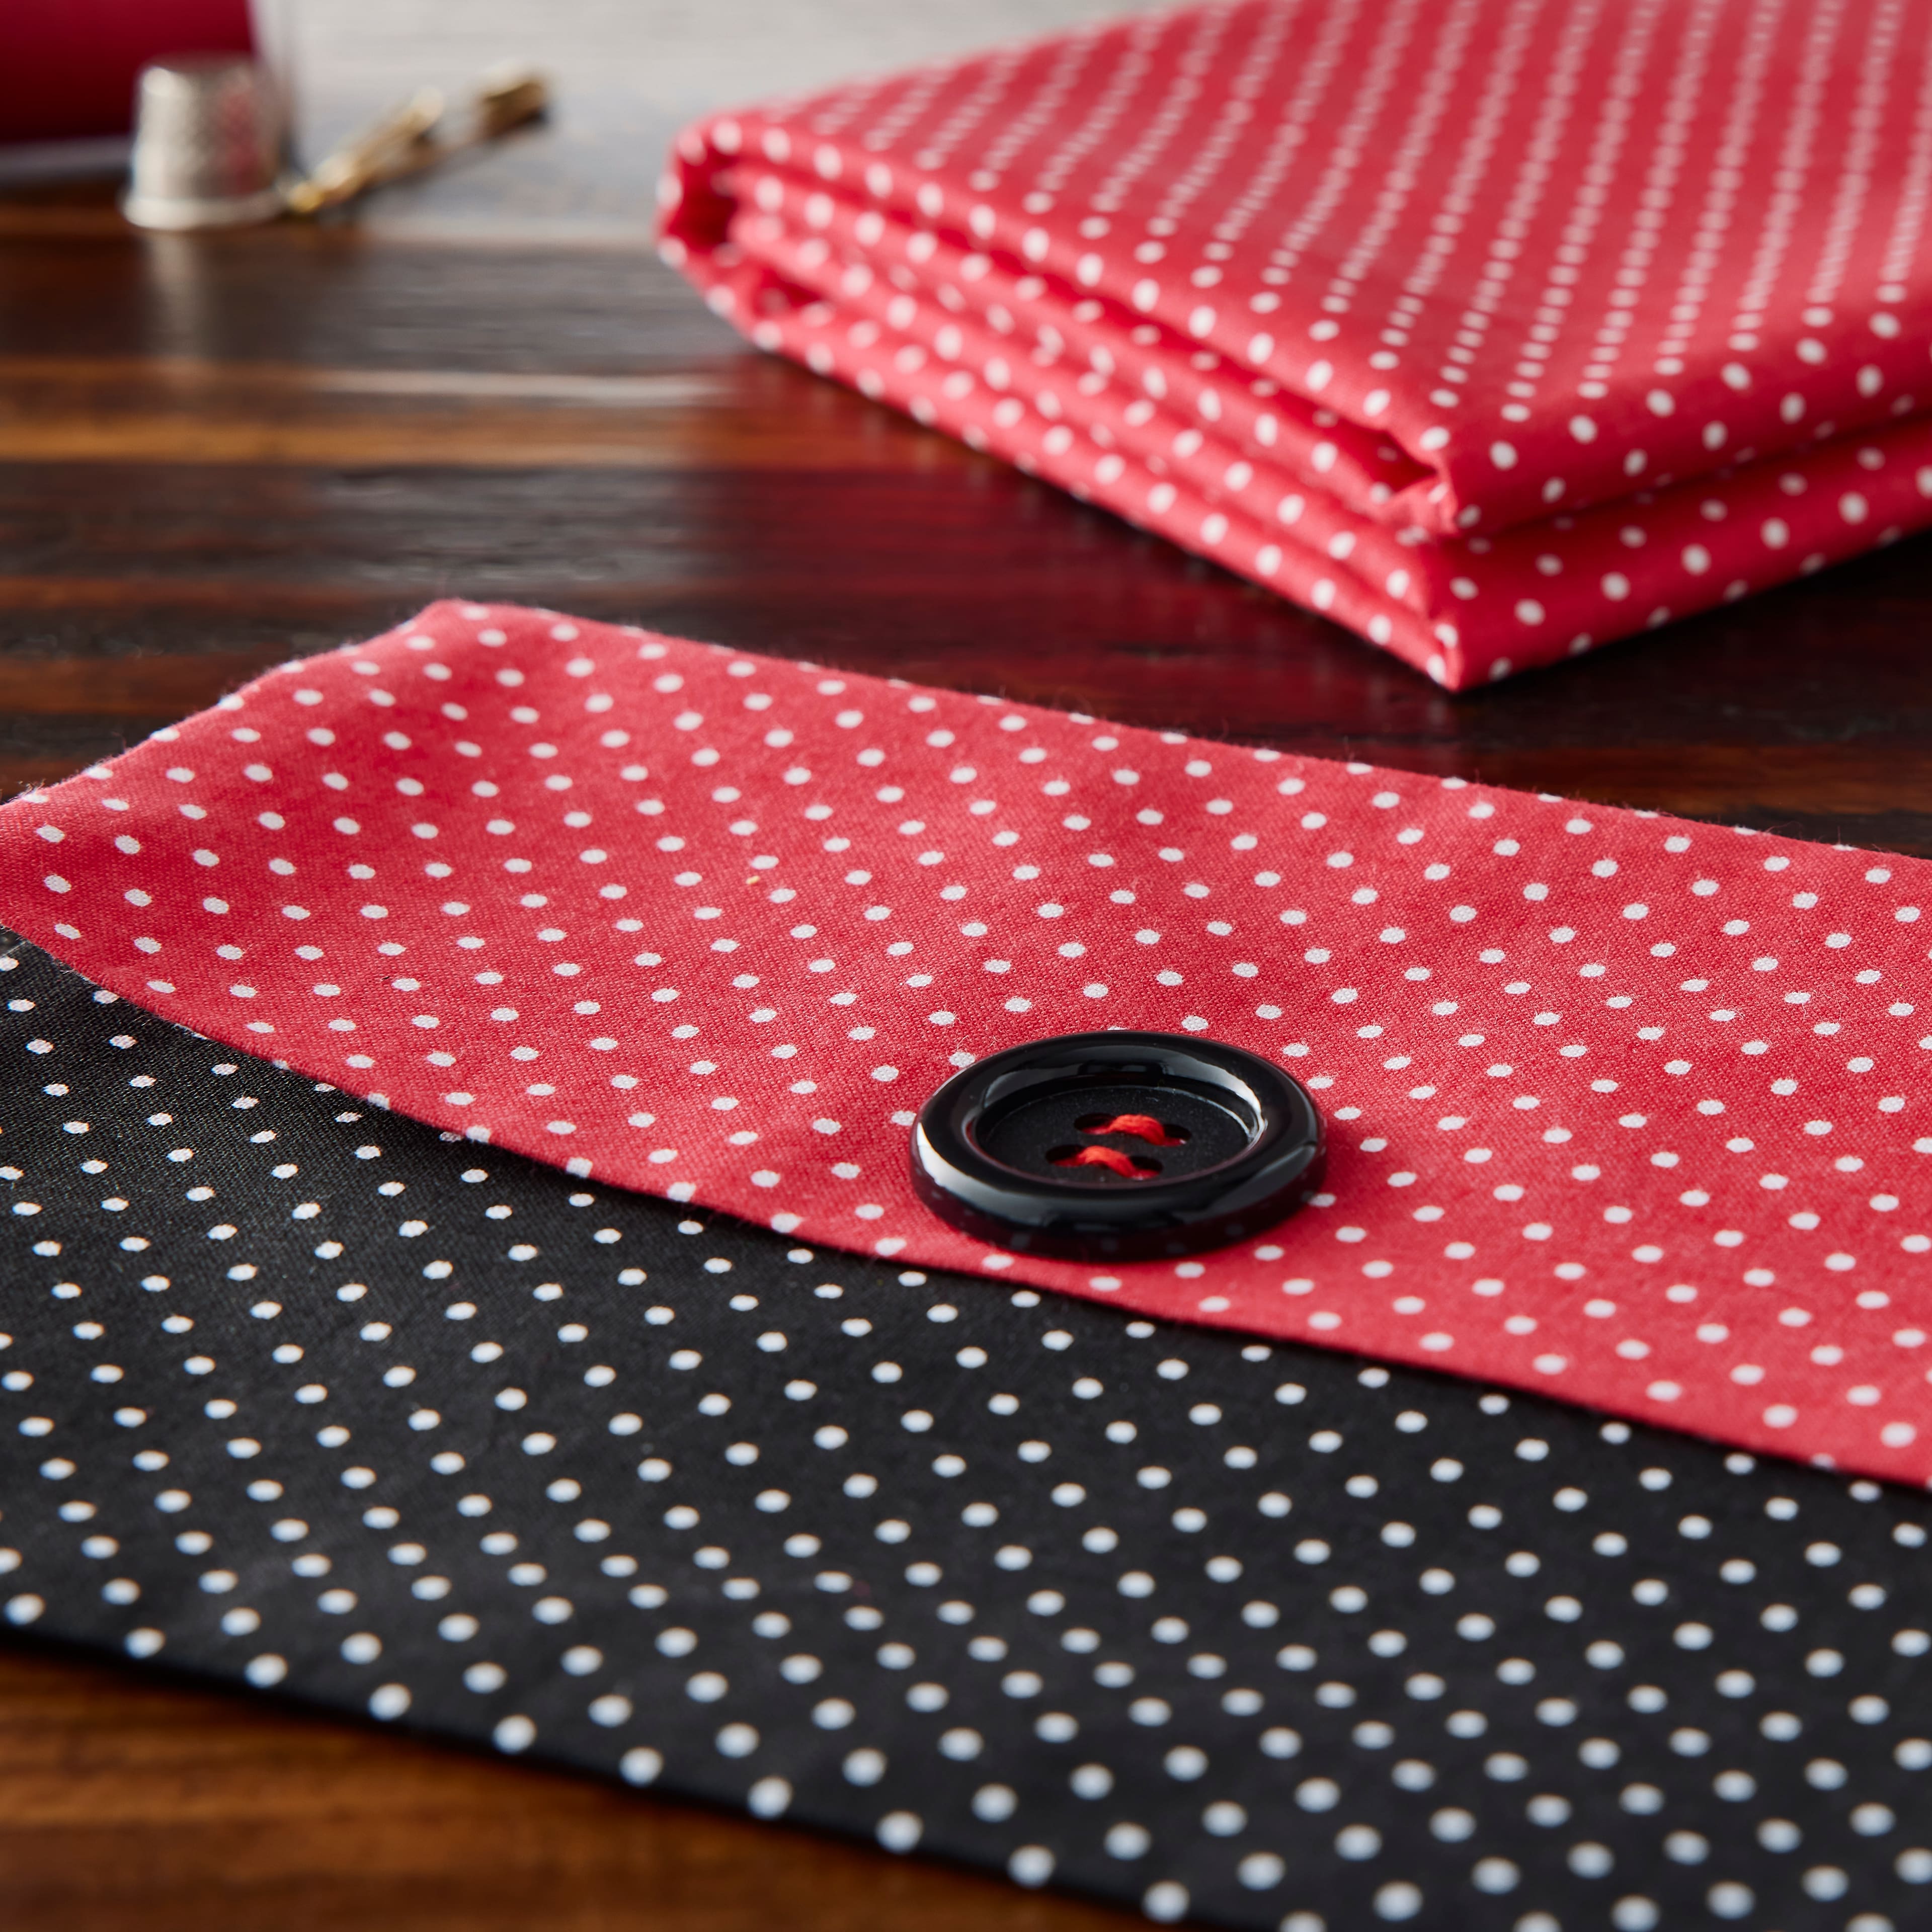 Fabric Traditions Red Polka Dot Cotton Fabric